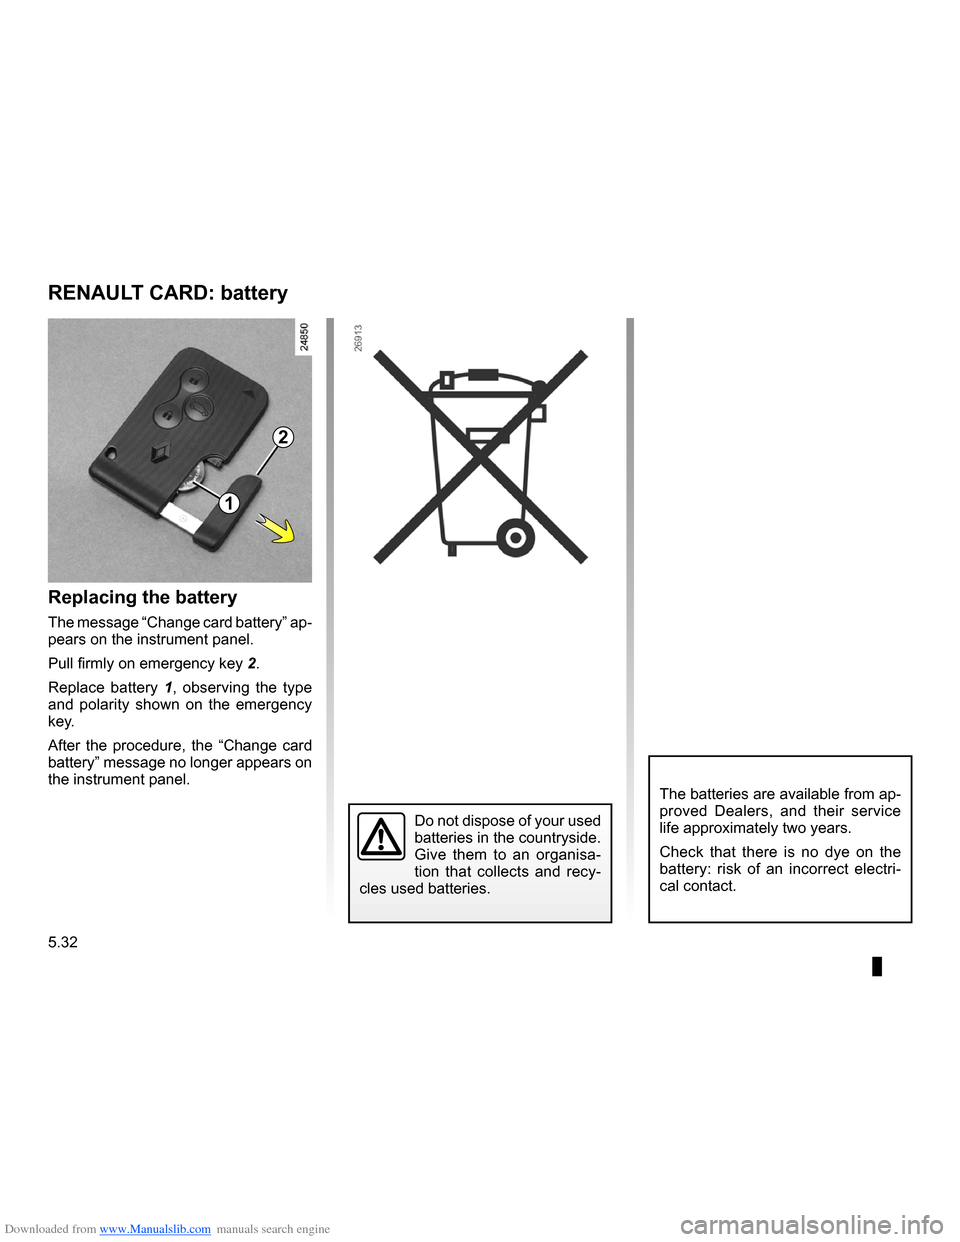 RENAULT CLIO 2009 X85 / 3.G Owners Manual Downloaded from www.Manualslib.com manuals search engine 
RENAULT cardbattery .............................................(up to the end of the DU)RENAULT card battery  .........................(up t